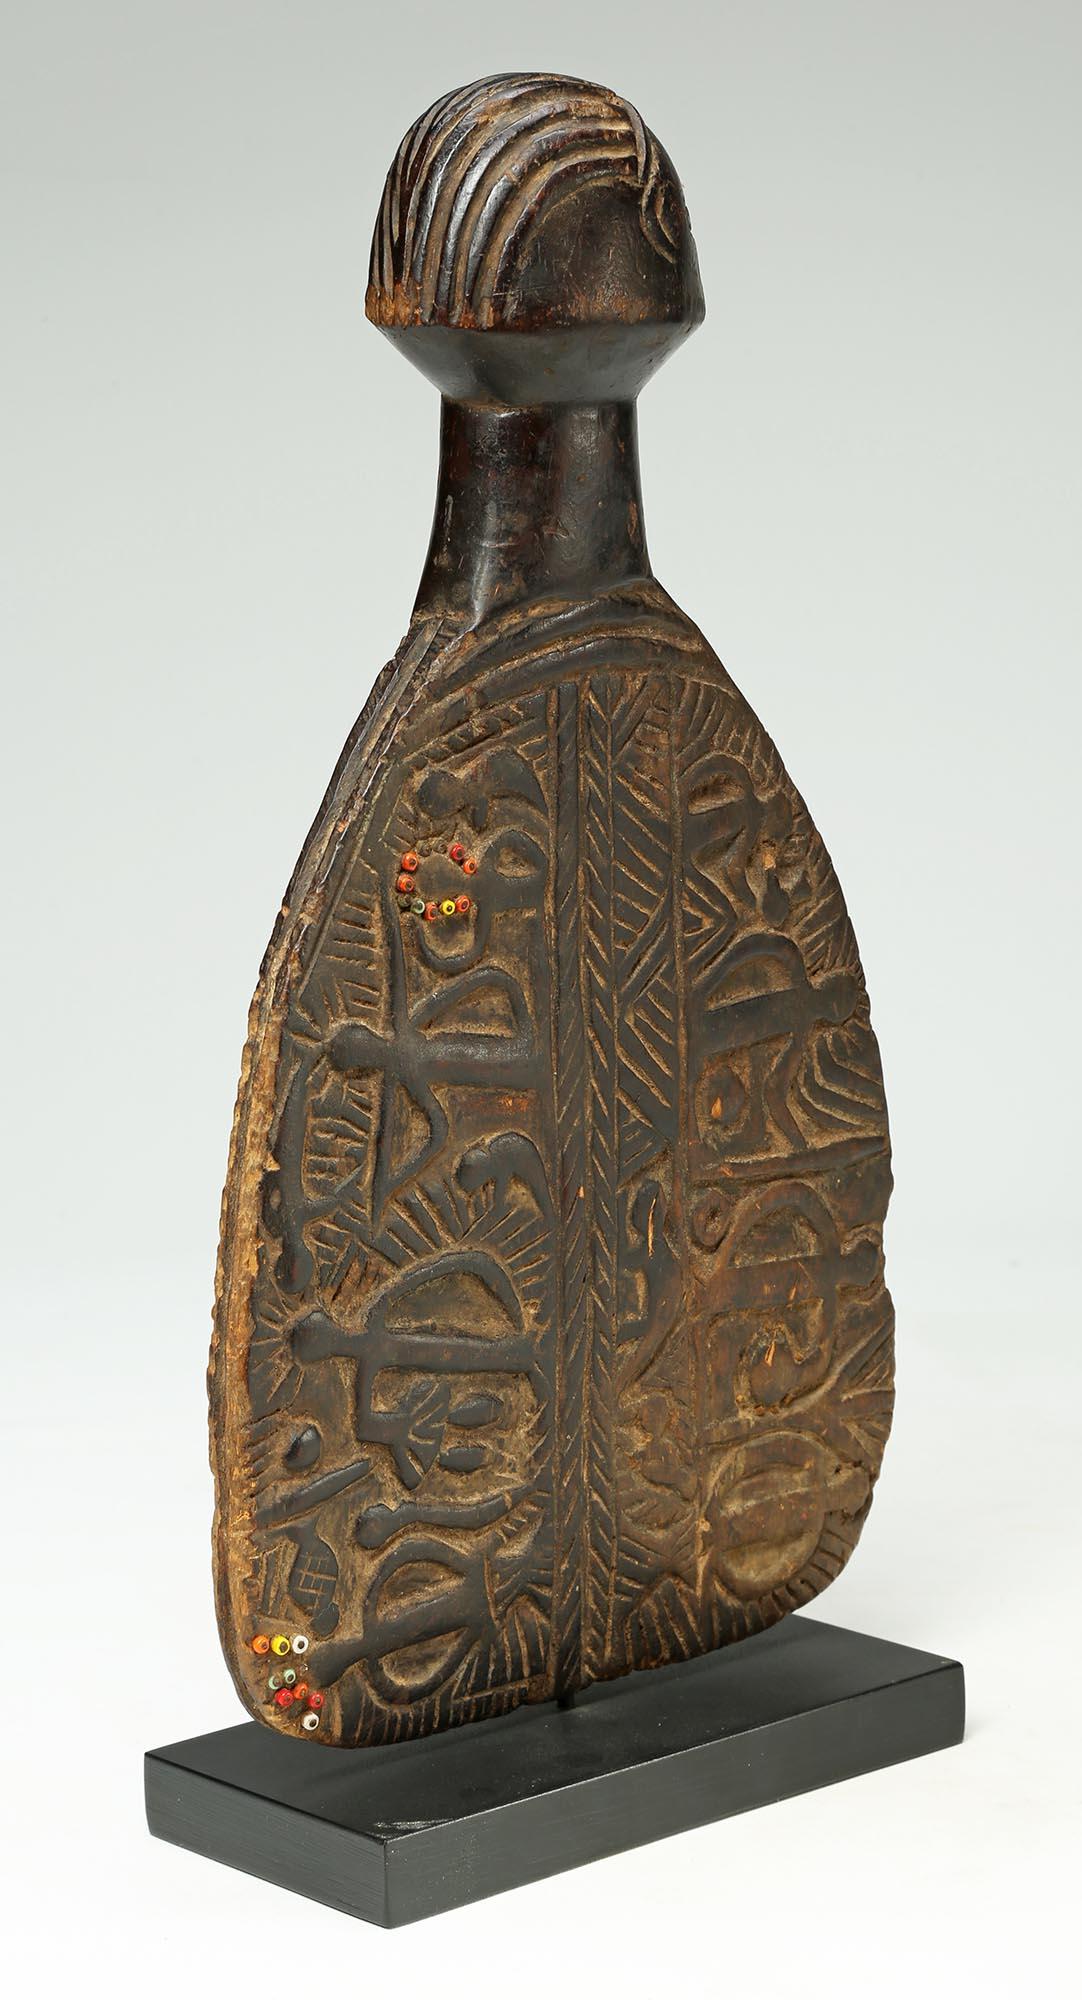 A rare finely carved Luba memory or story board in the shape of a carved paddle with inlaid bead circles on one side and raised figures. In good condition some wear to front of face and around rim. From the Democratic Republic of Congo, early to